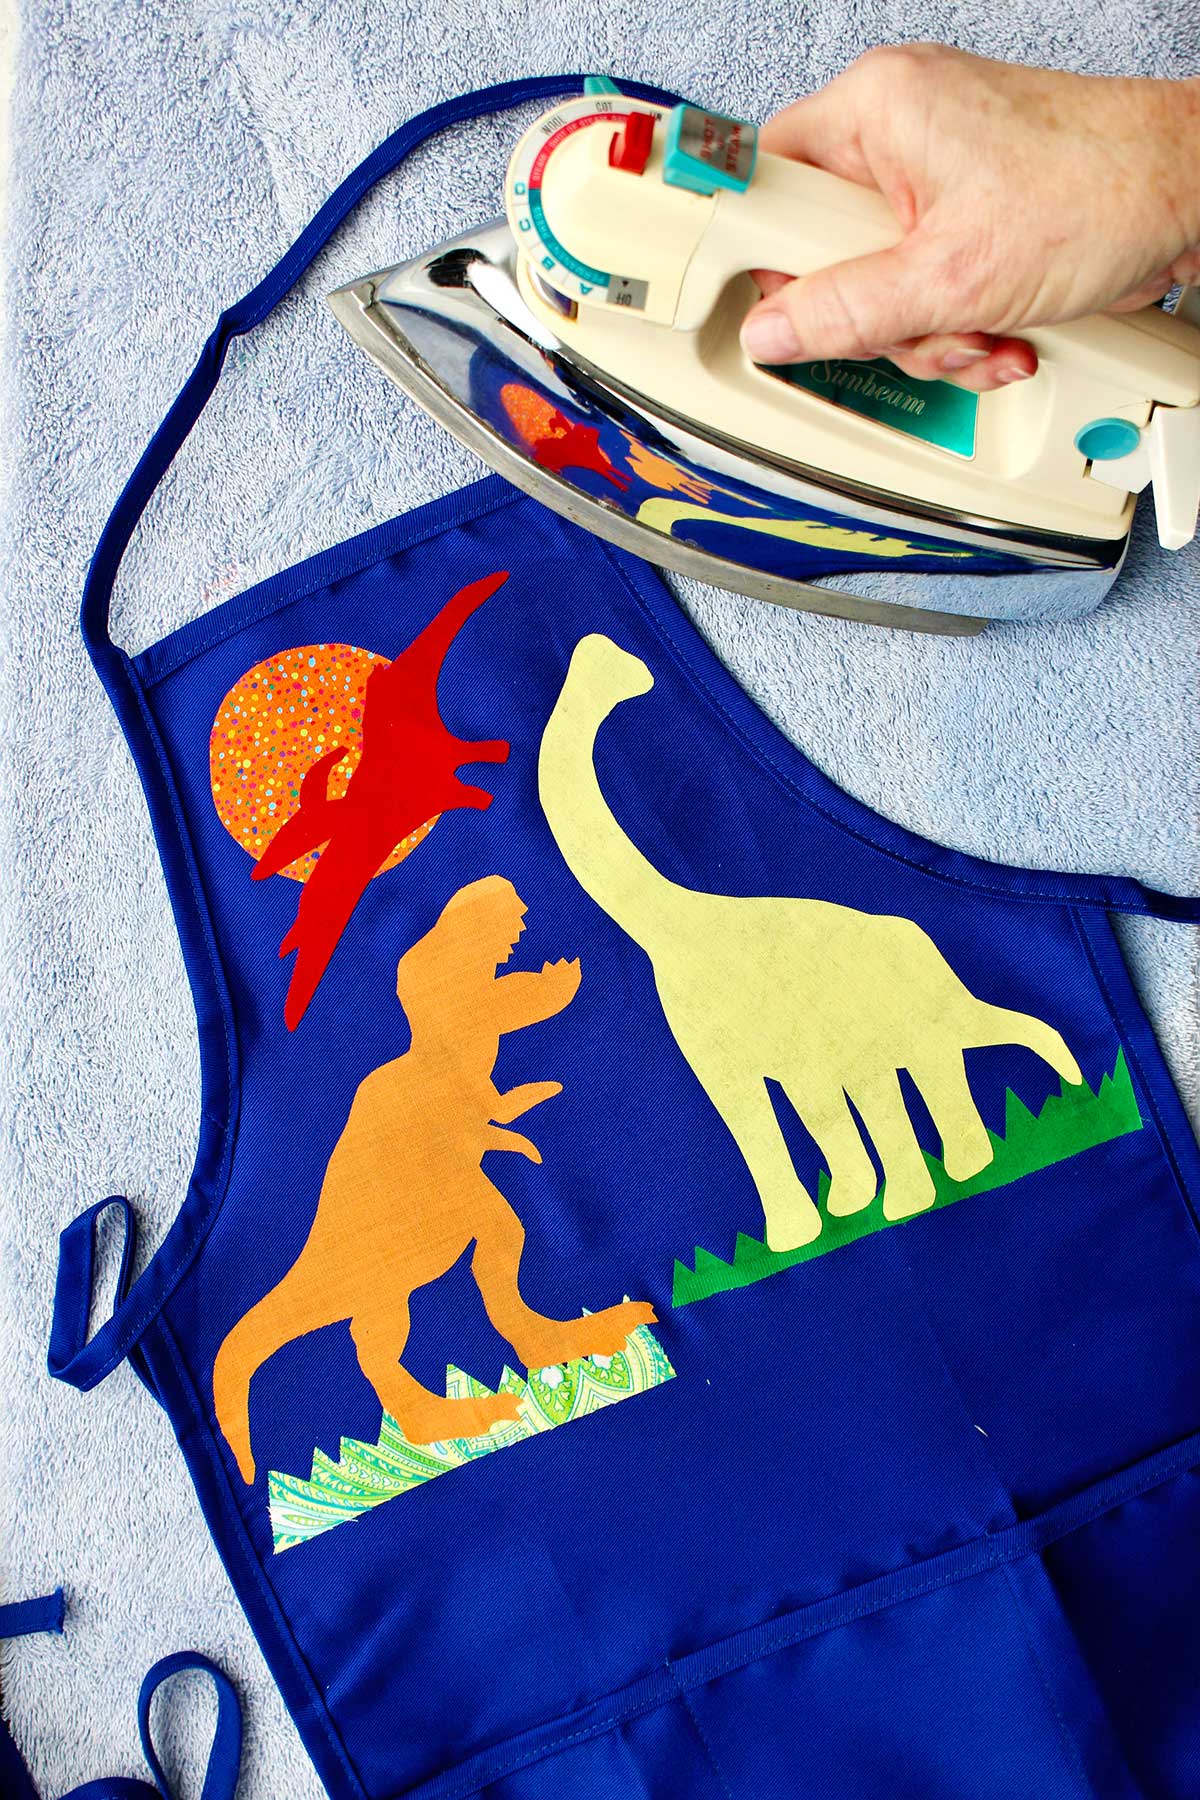 Hand holding iron over almost complete dinosaur decorated blue apron.